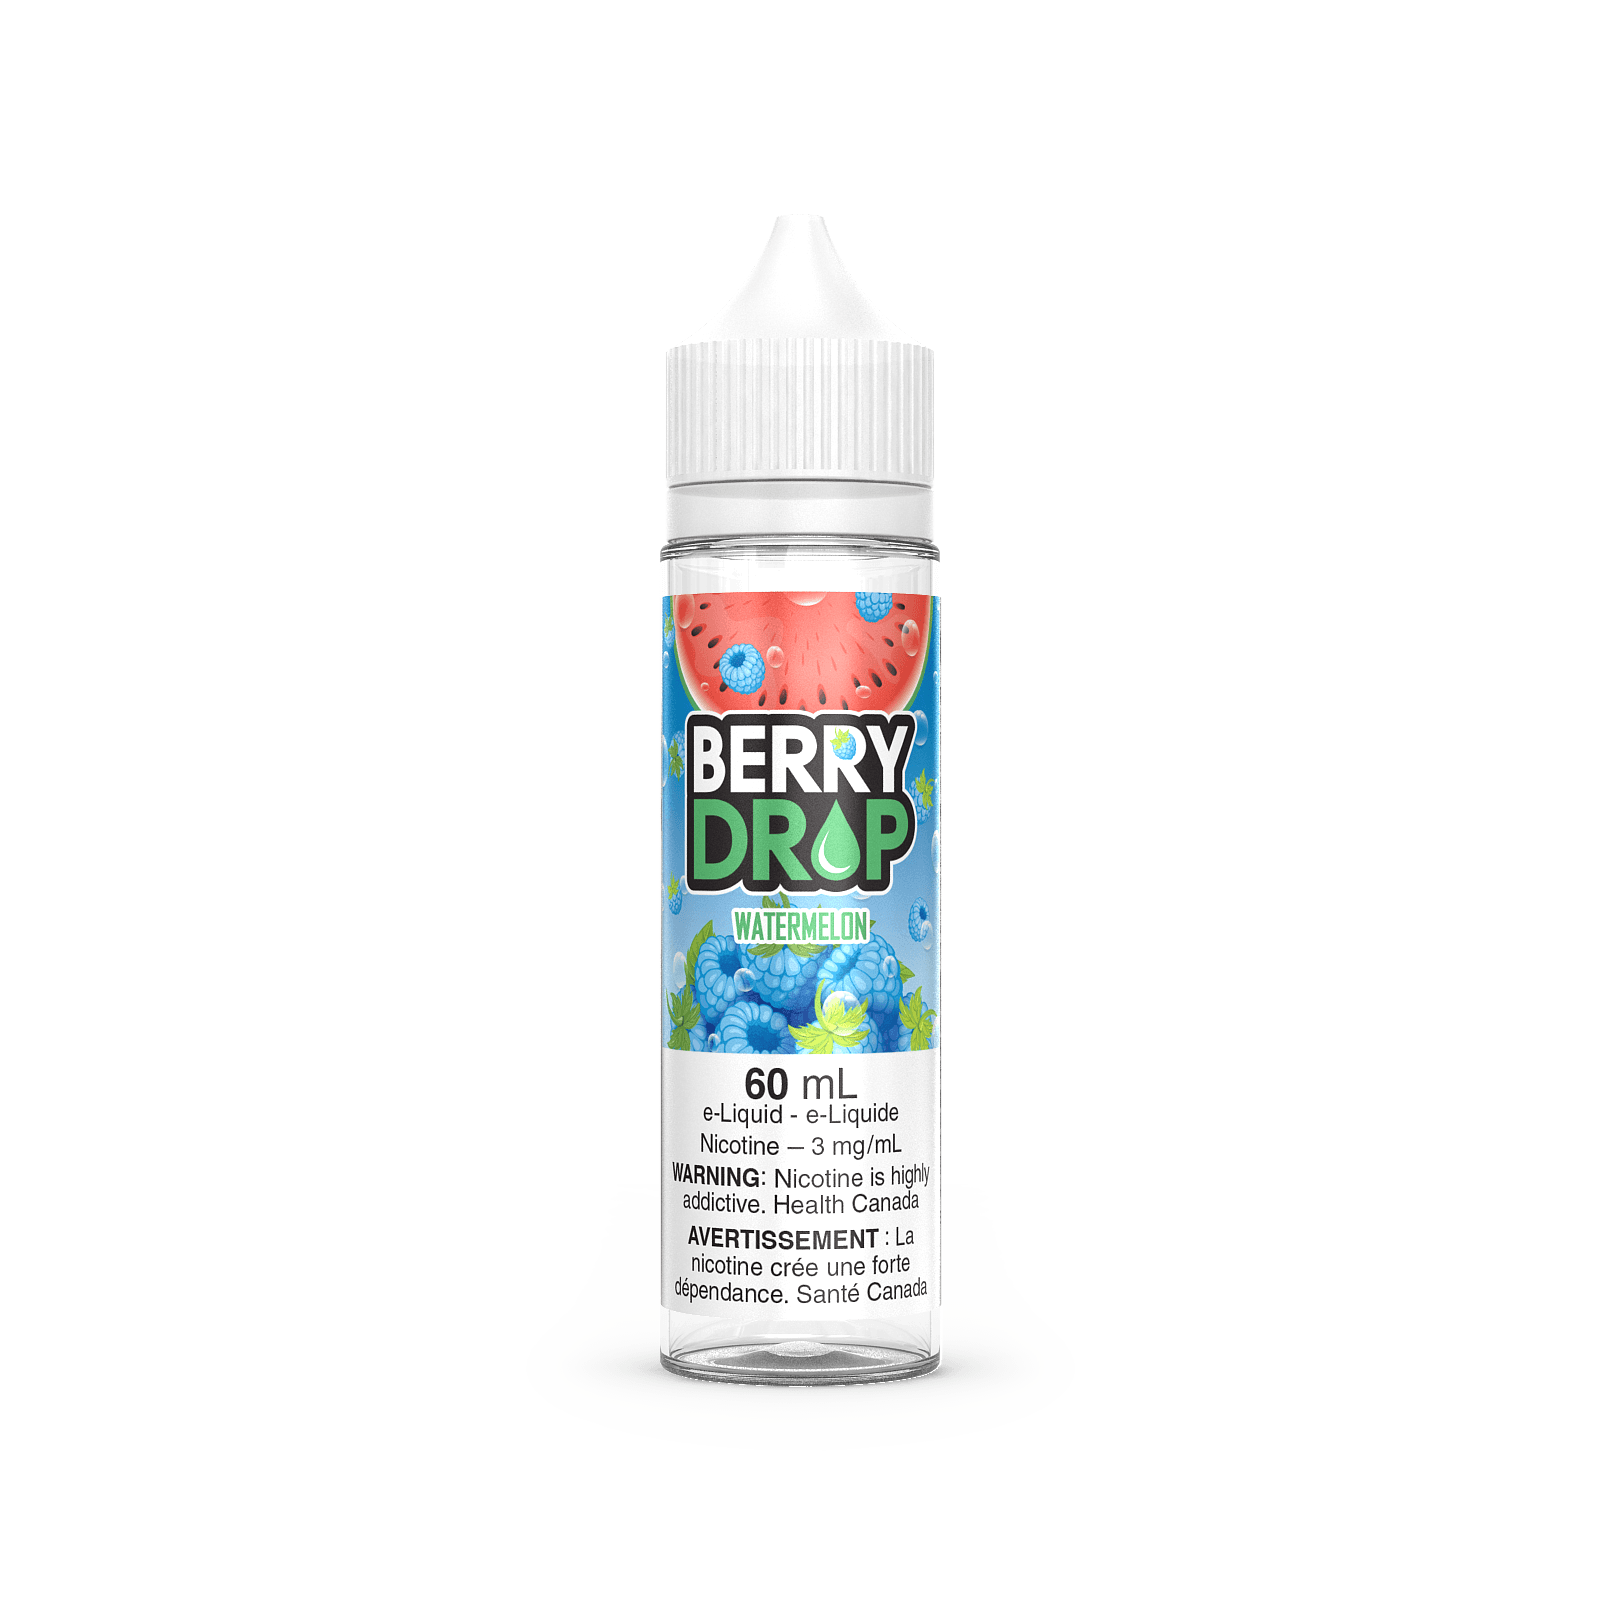 WATERMELON BY BERRY DROP